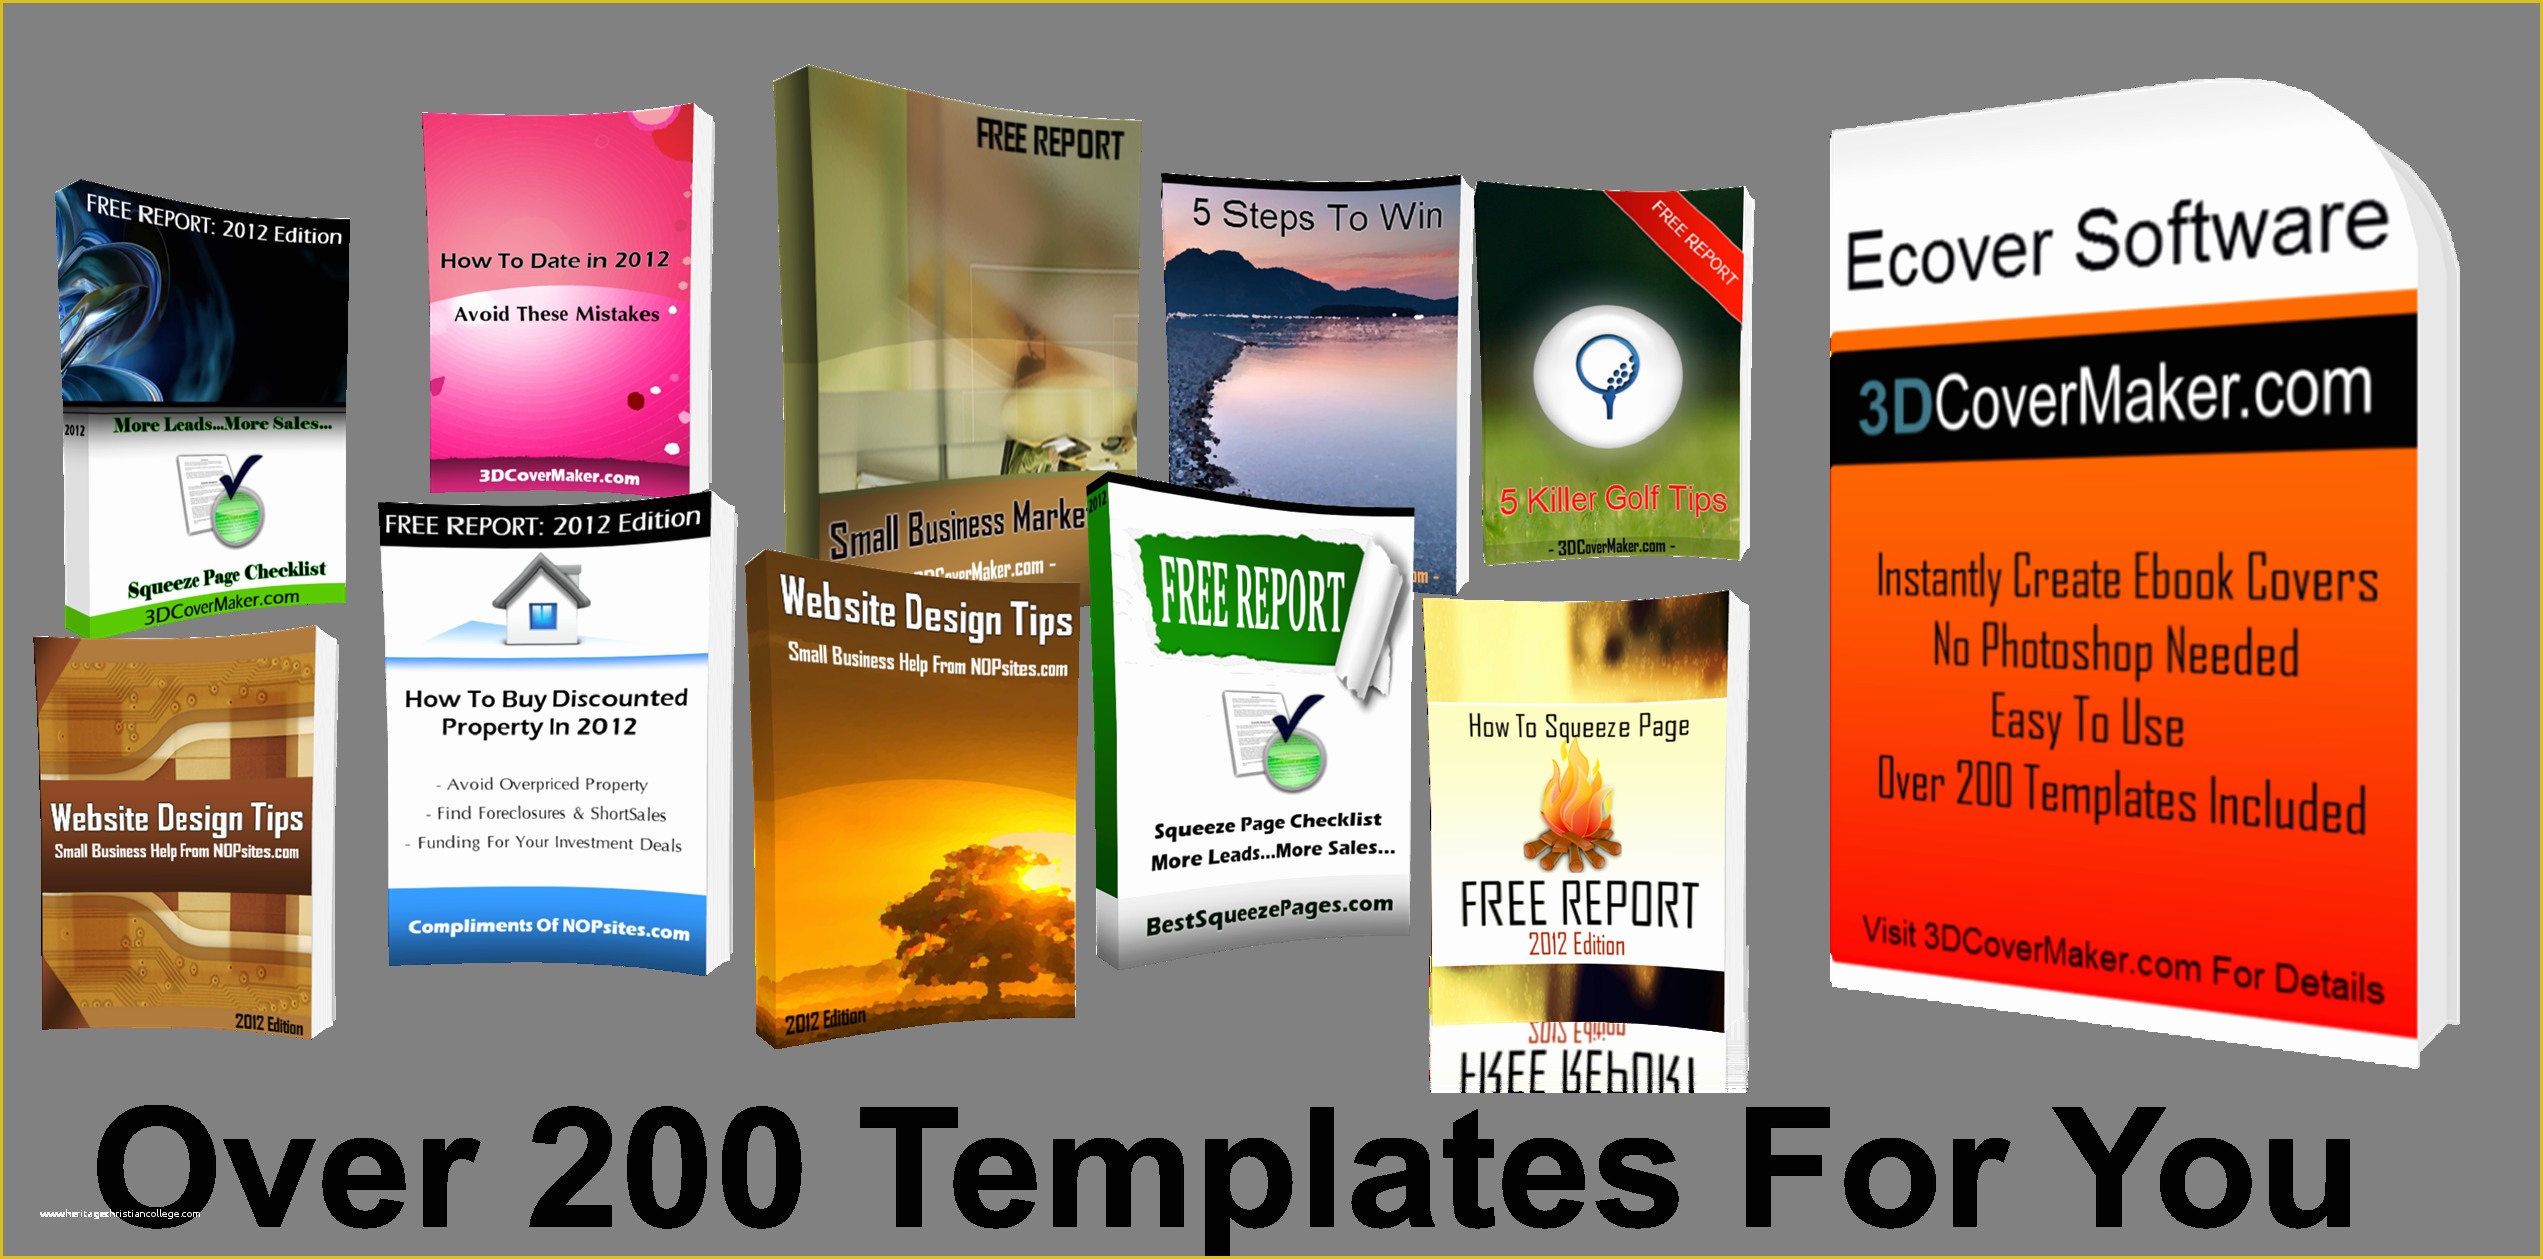 Free Ebook Cover Templates for Photoshop Of 3d Cover Maker Ebook software Create Unlimited Covers